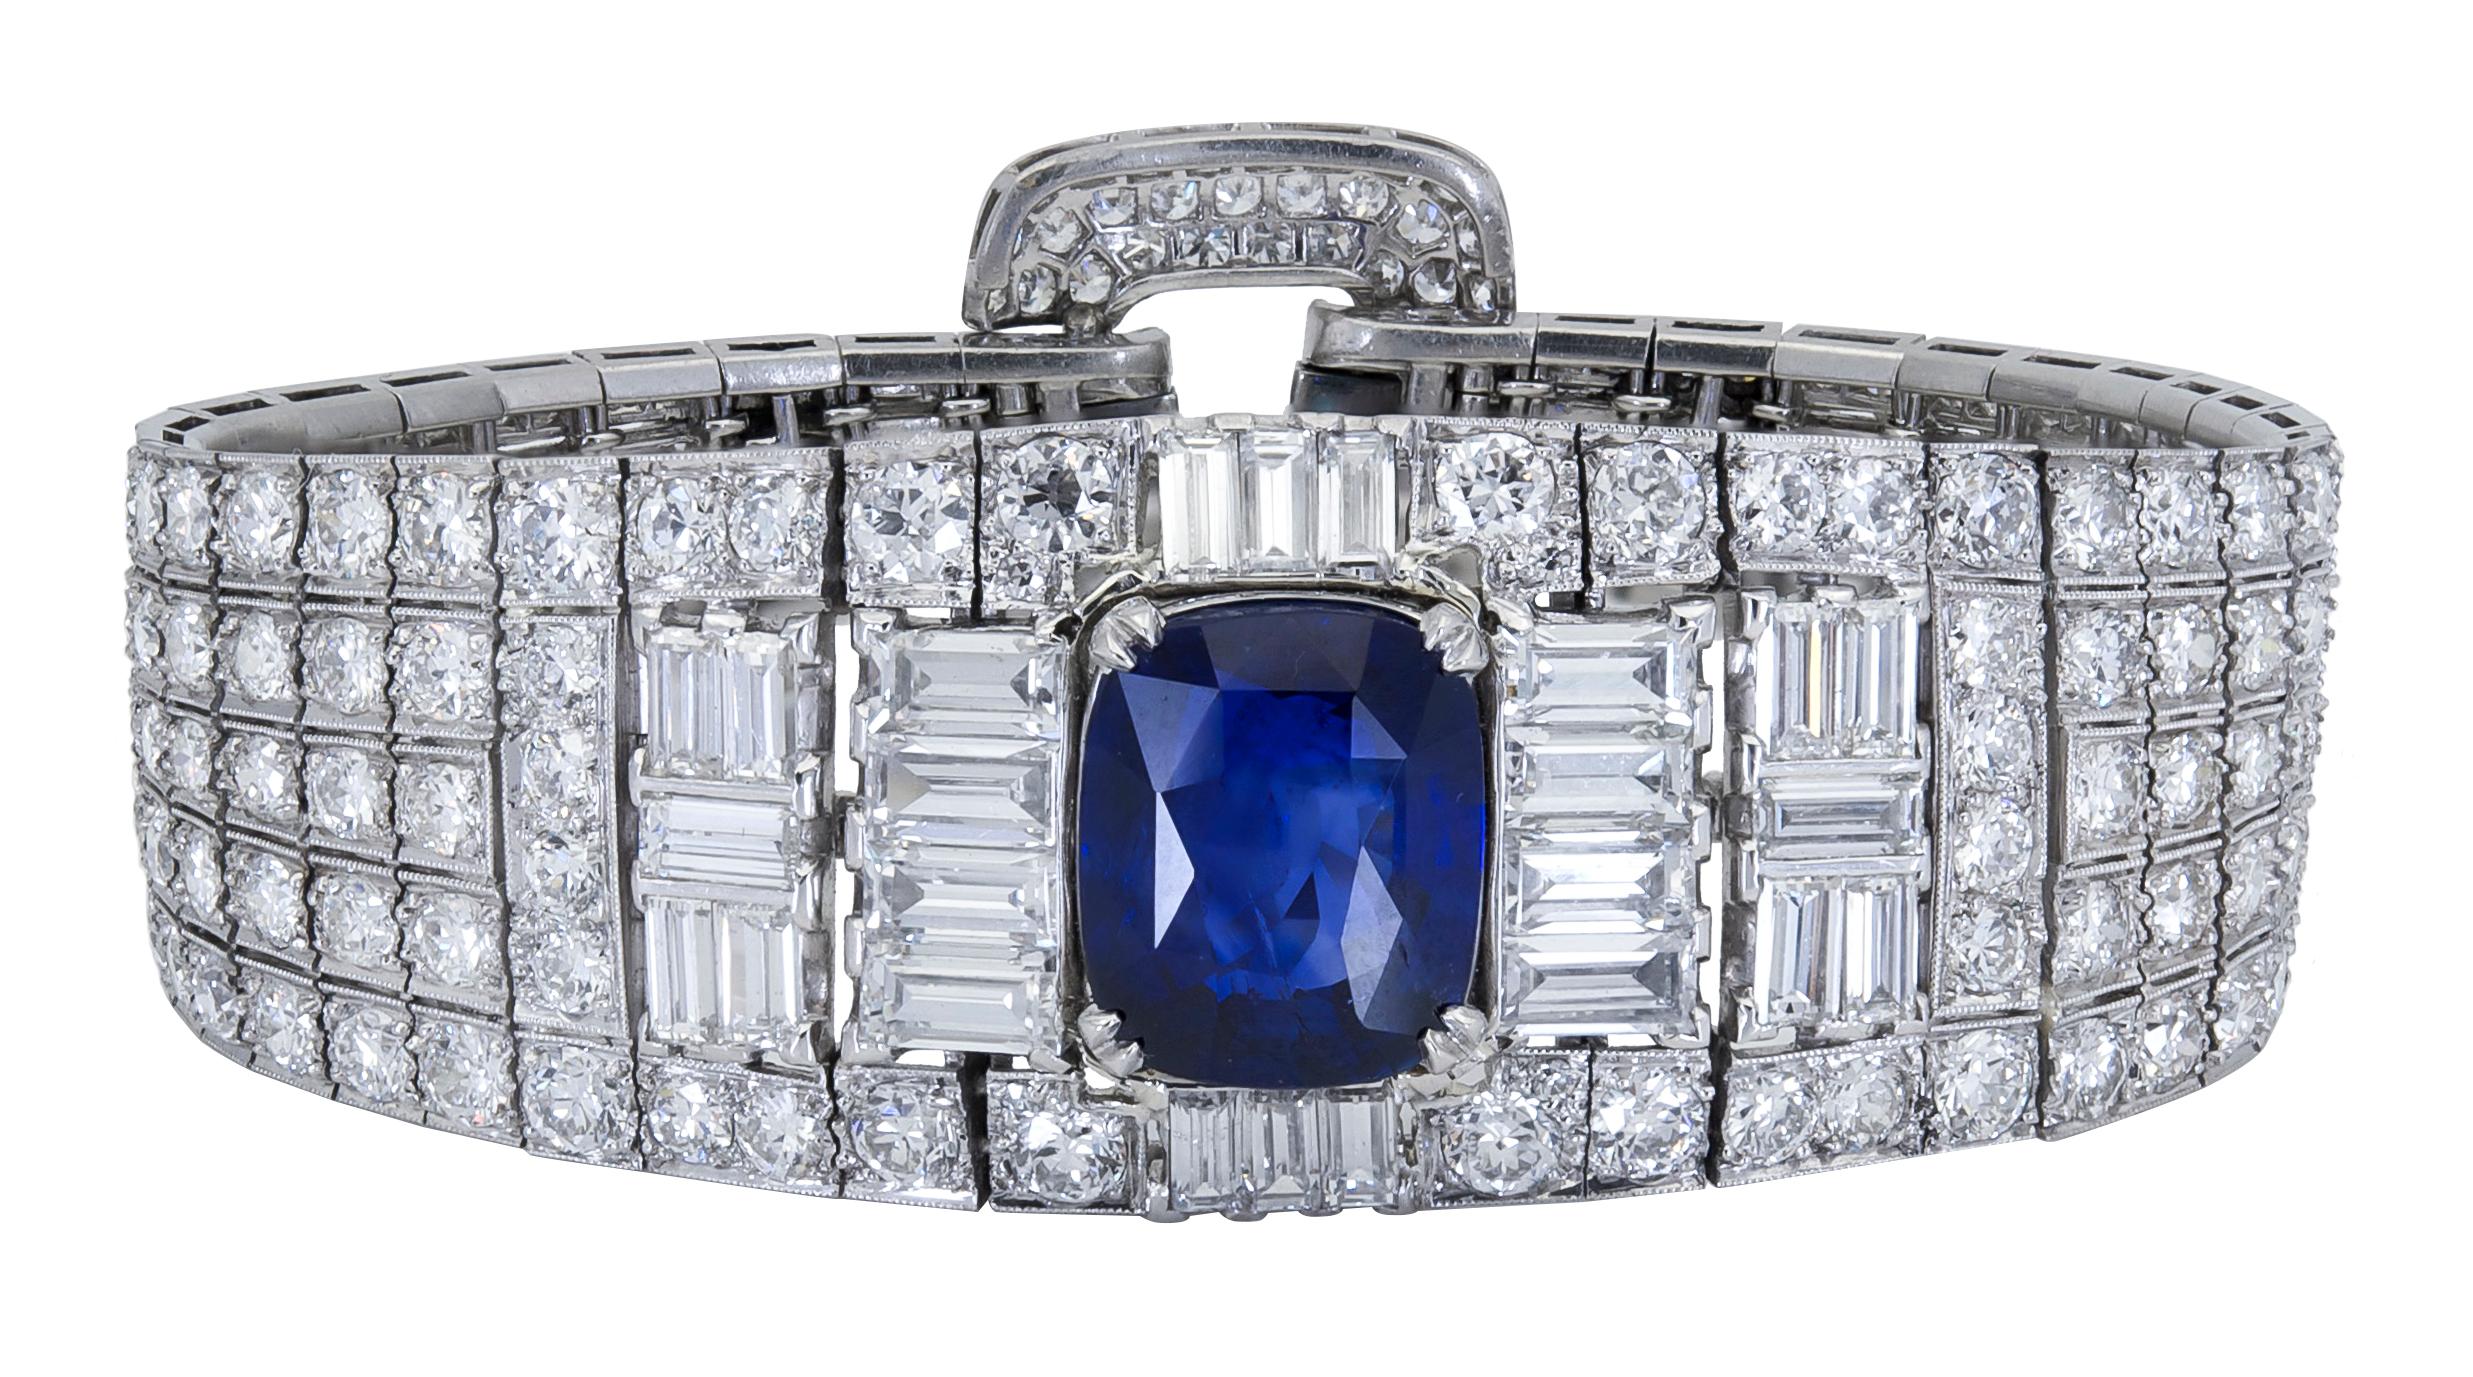 A very beautiful and stunning bracelet from the art deco era showcasing a rich blue cushion cut sapphire, set in a diamond encrusted platinum setting. The bracelet is made with exceptional craftsmanship and is in excellent condition. 
Sapphire